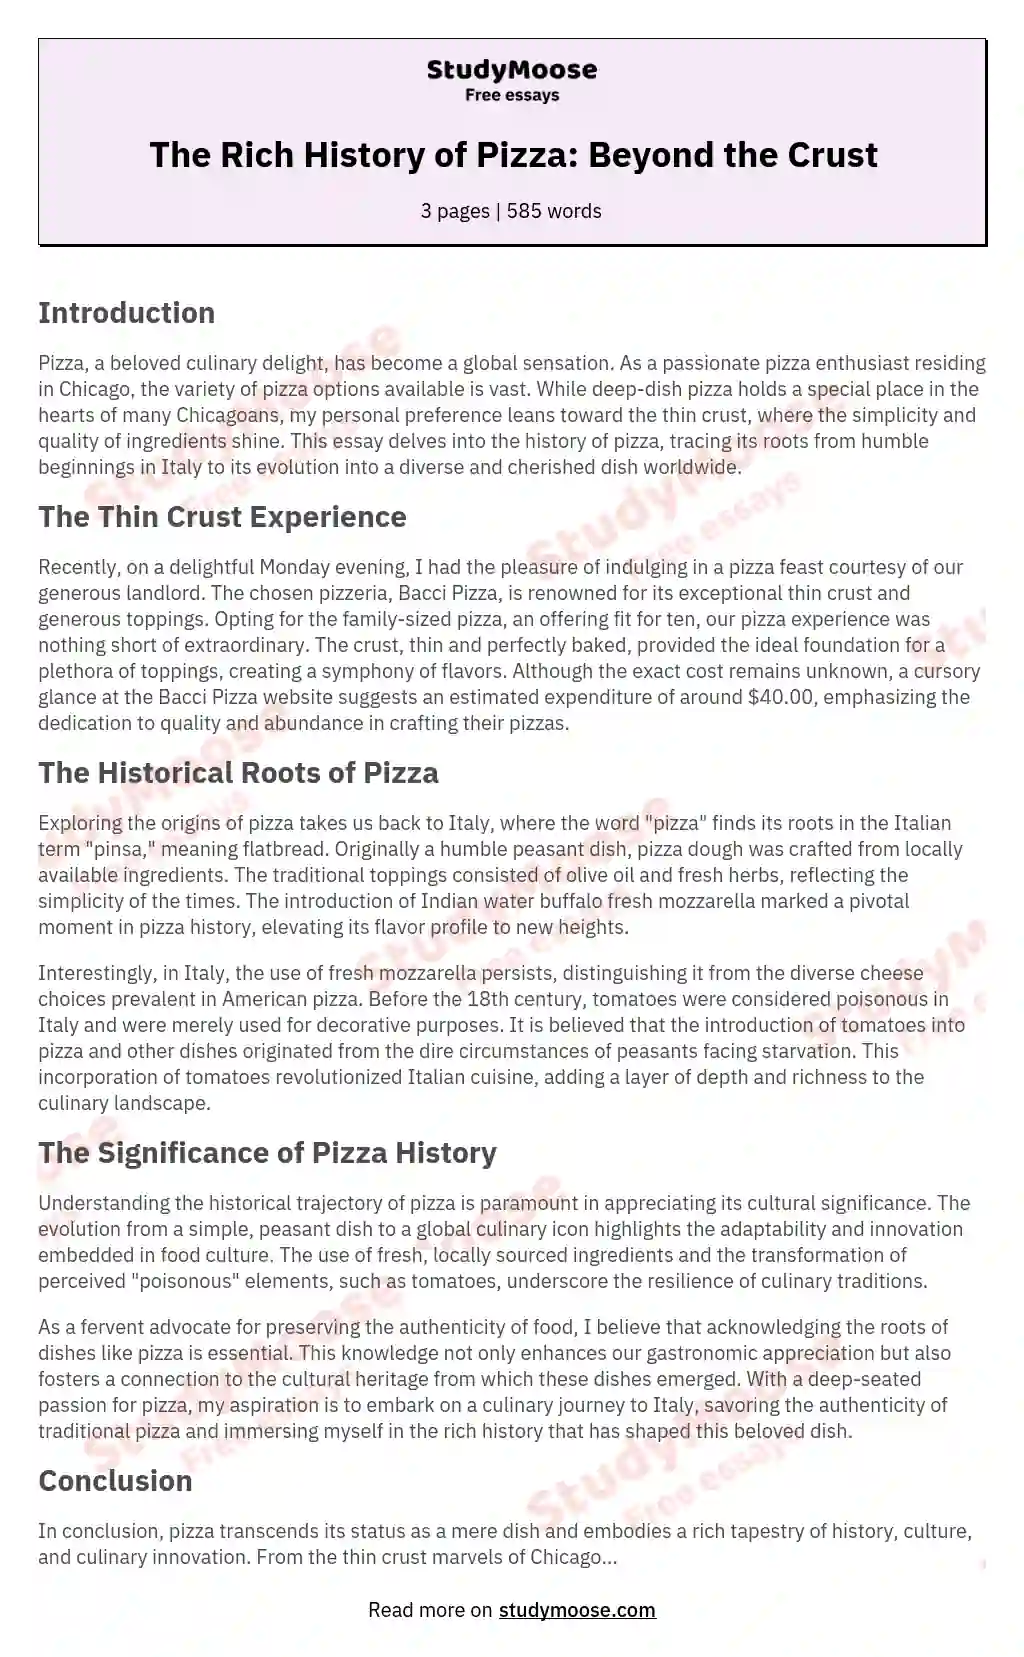 History of Pizza